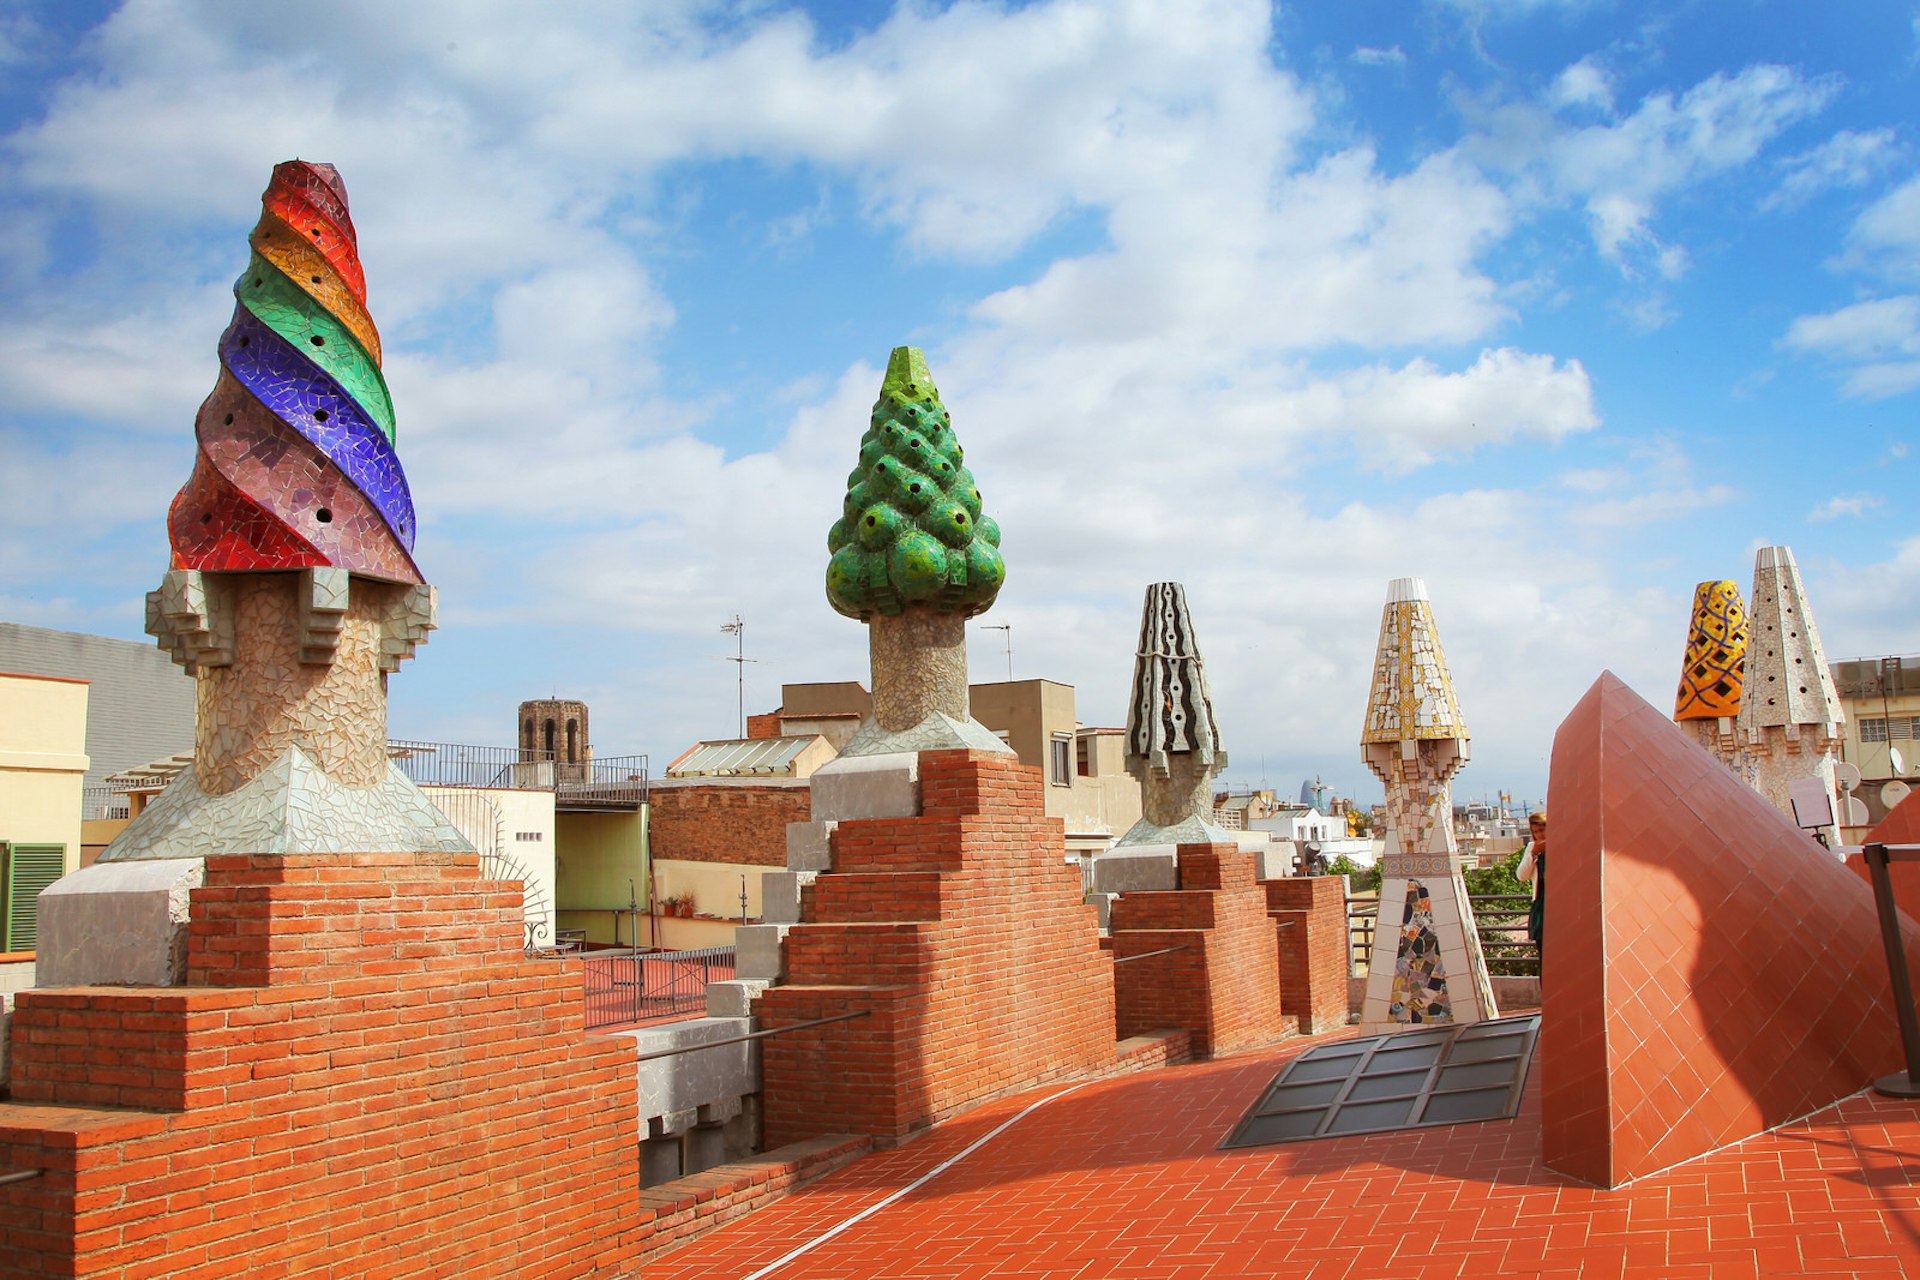 The mosaic chimneys on the roof of Palau Güell © Lisa A / Shutterstock